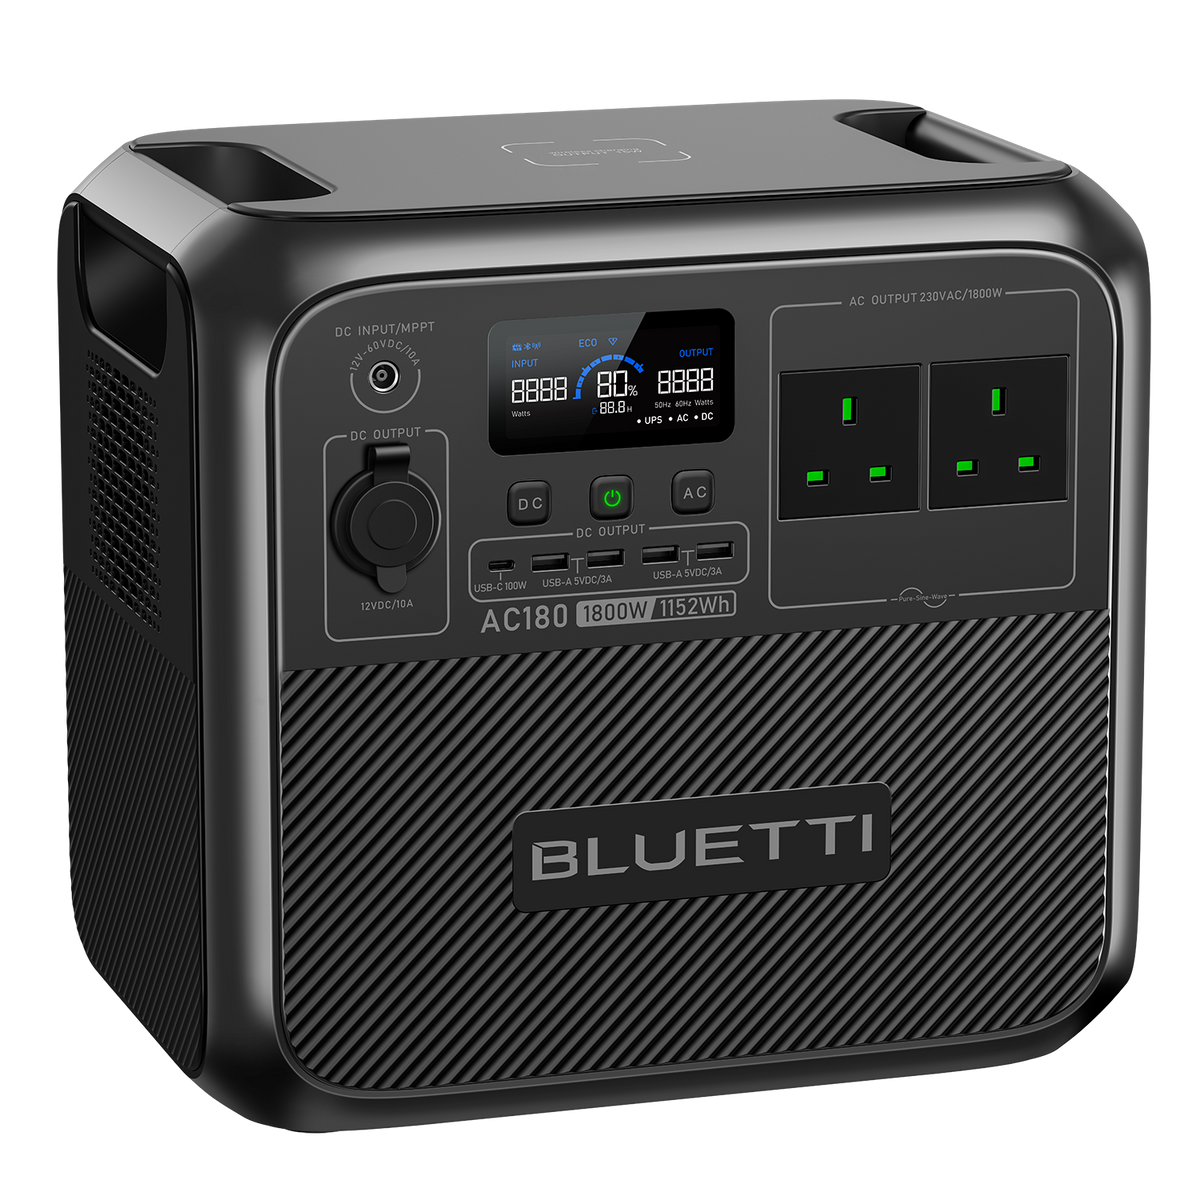 BLUETTI Launches AC180 Portable Power Supply for Emergency Backups,  Blackouts, and Off-Grid Excursions